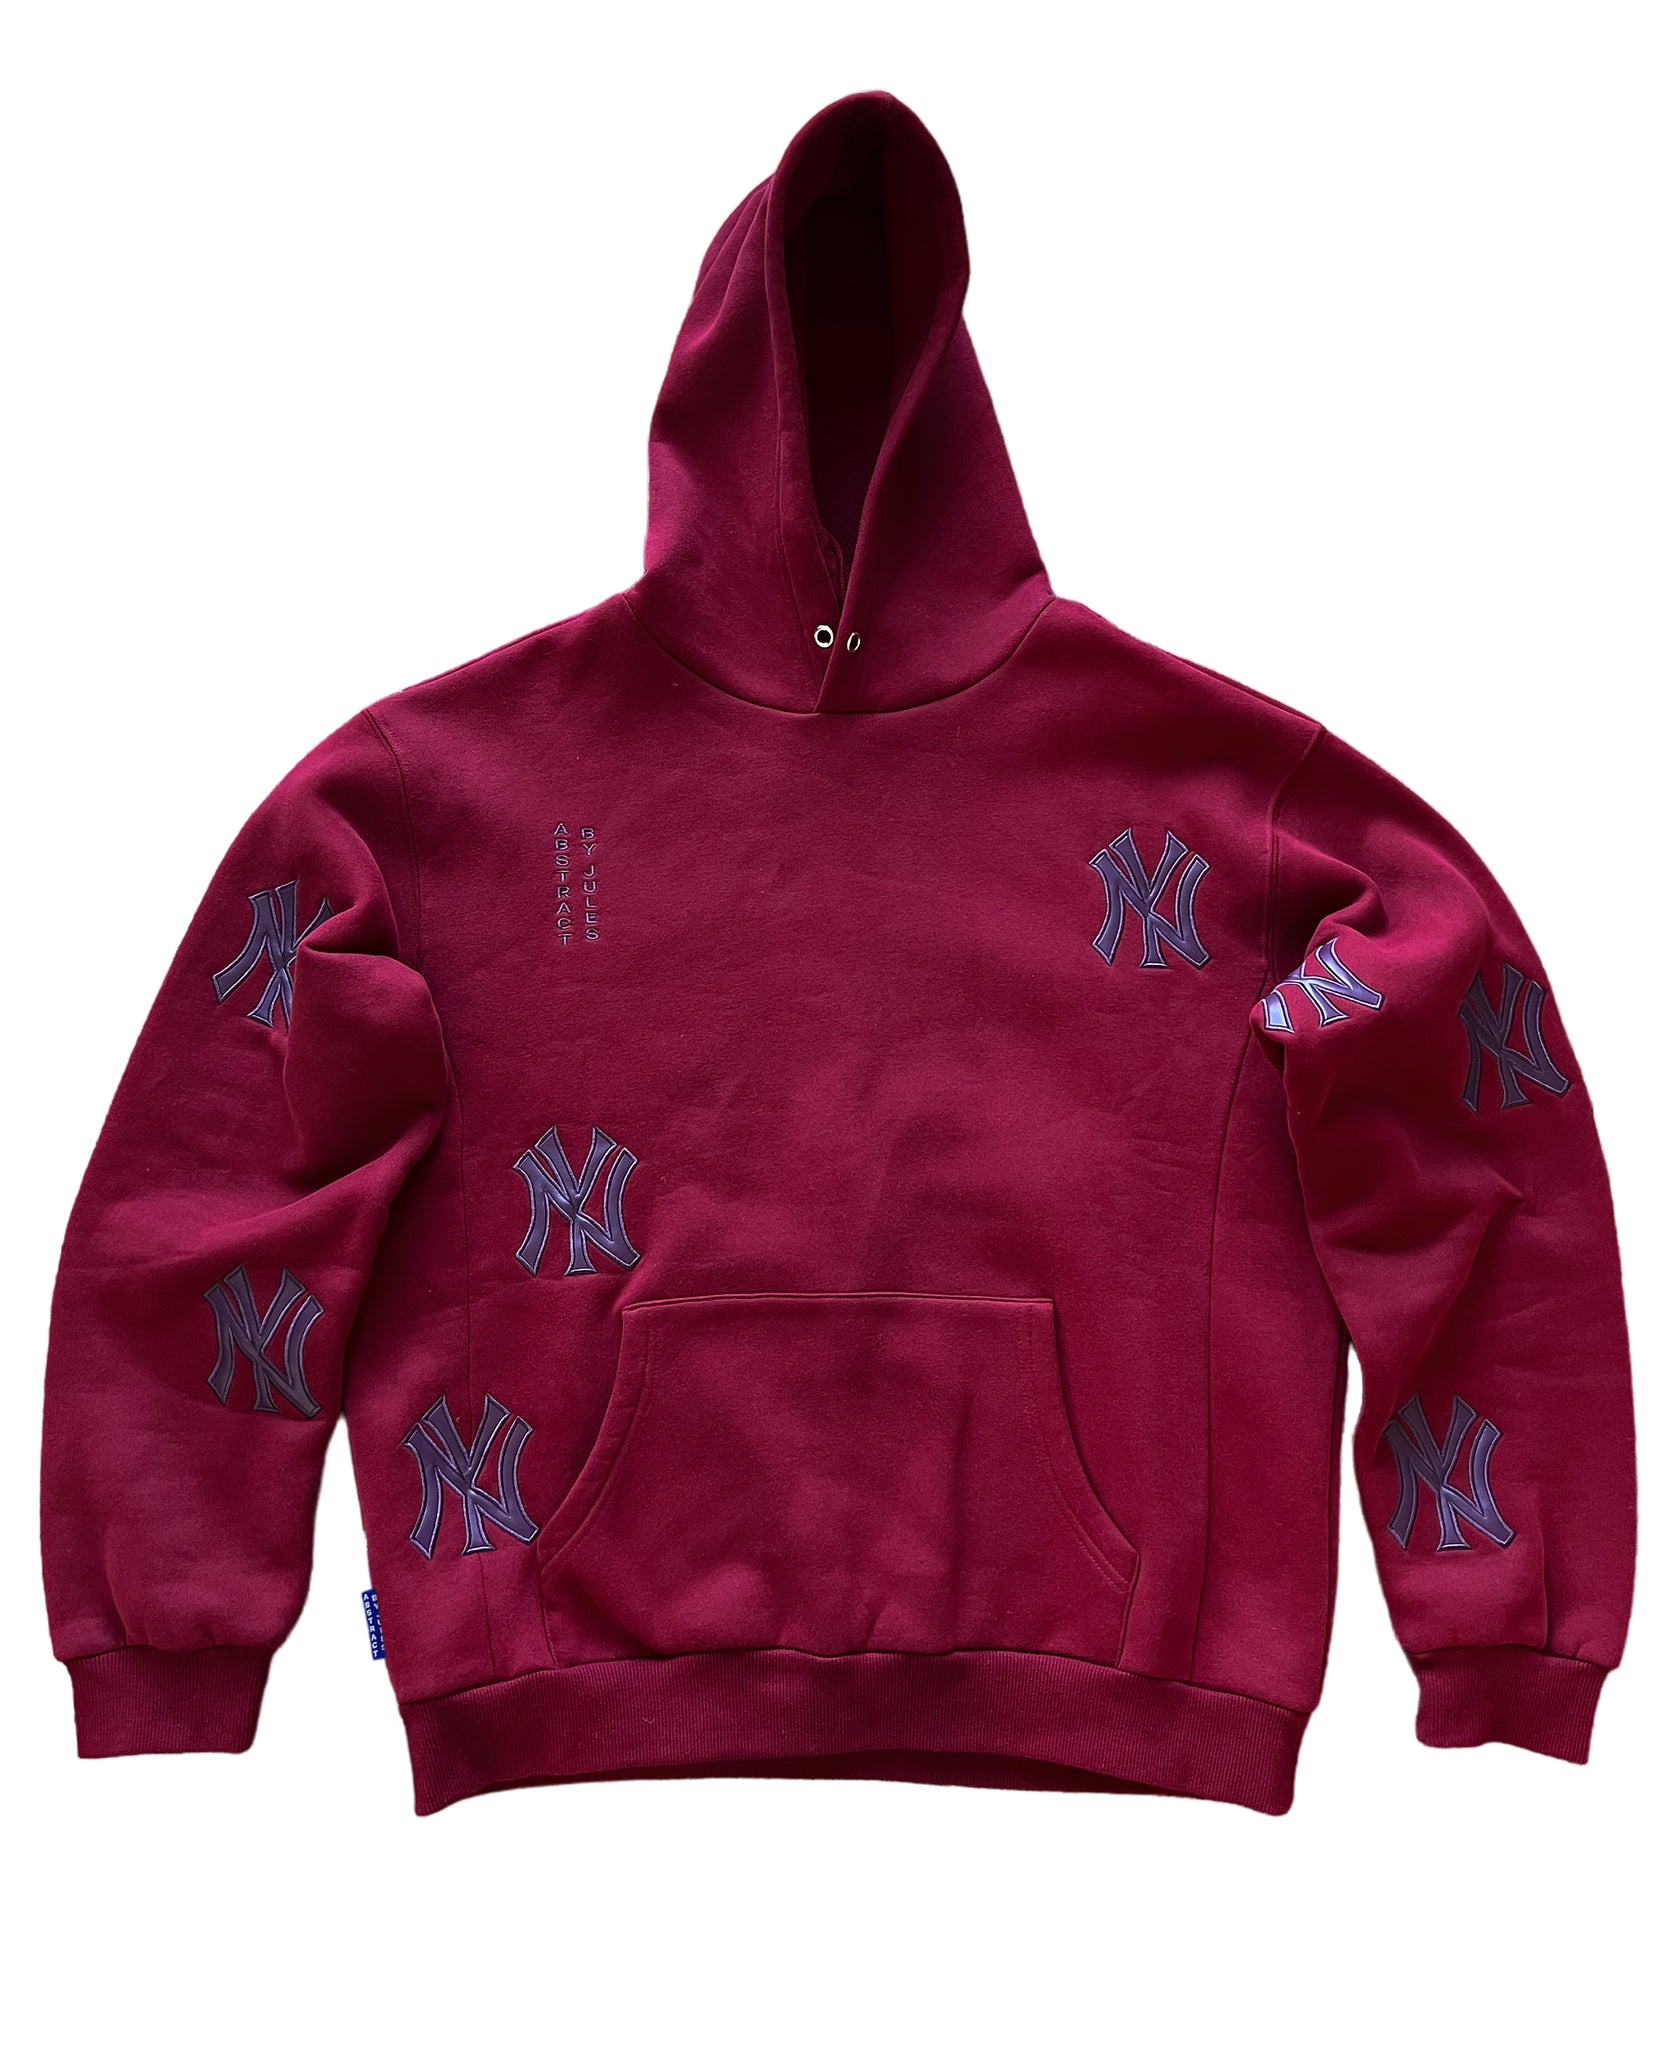 NY Patch Hoodie - Maroon